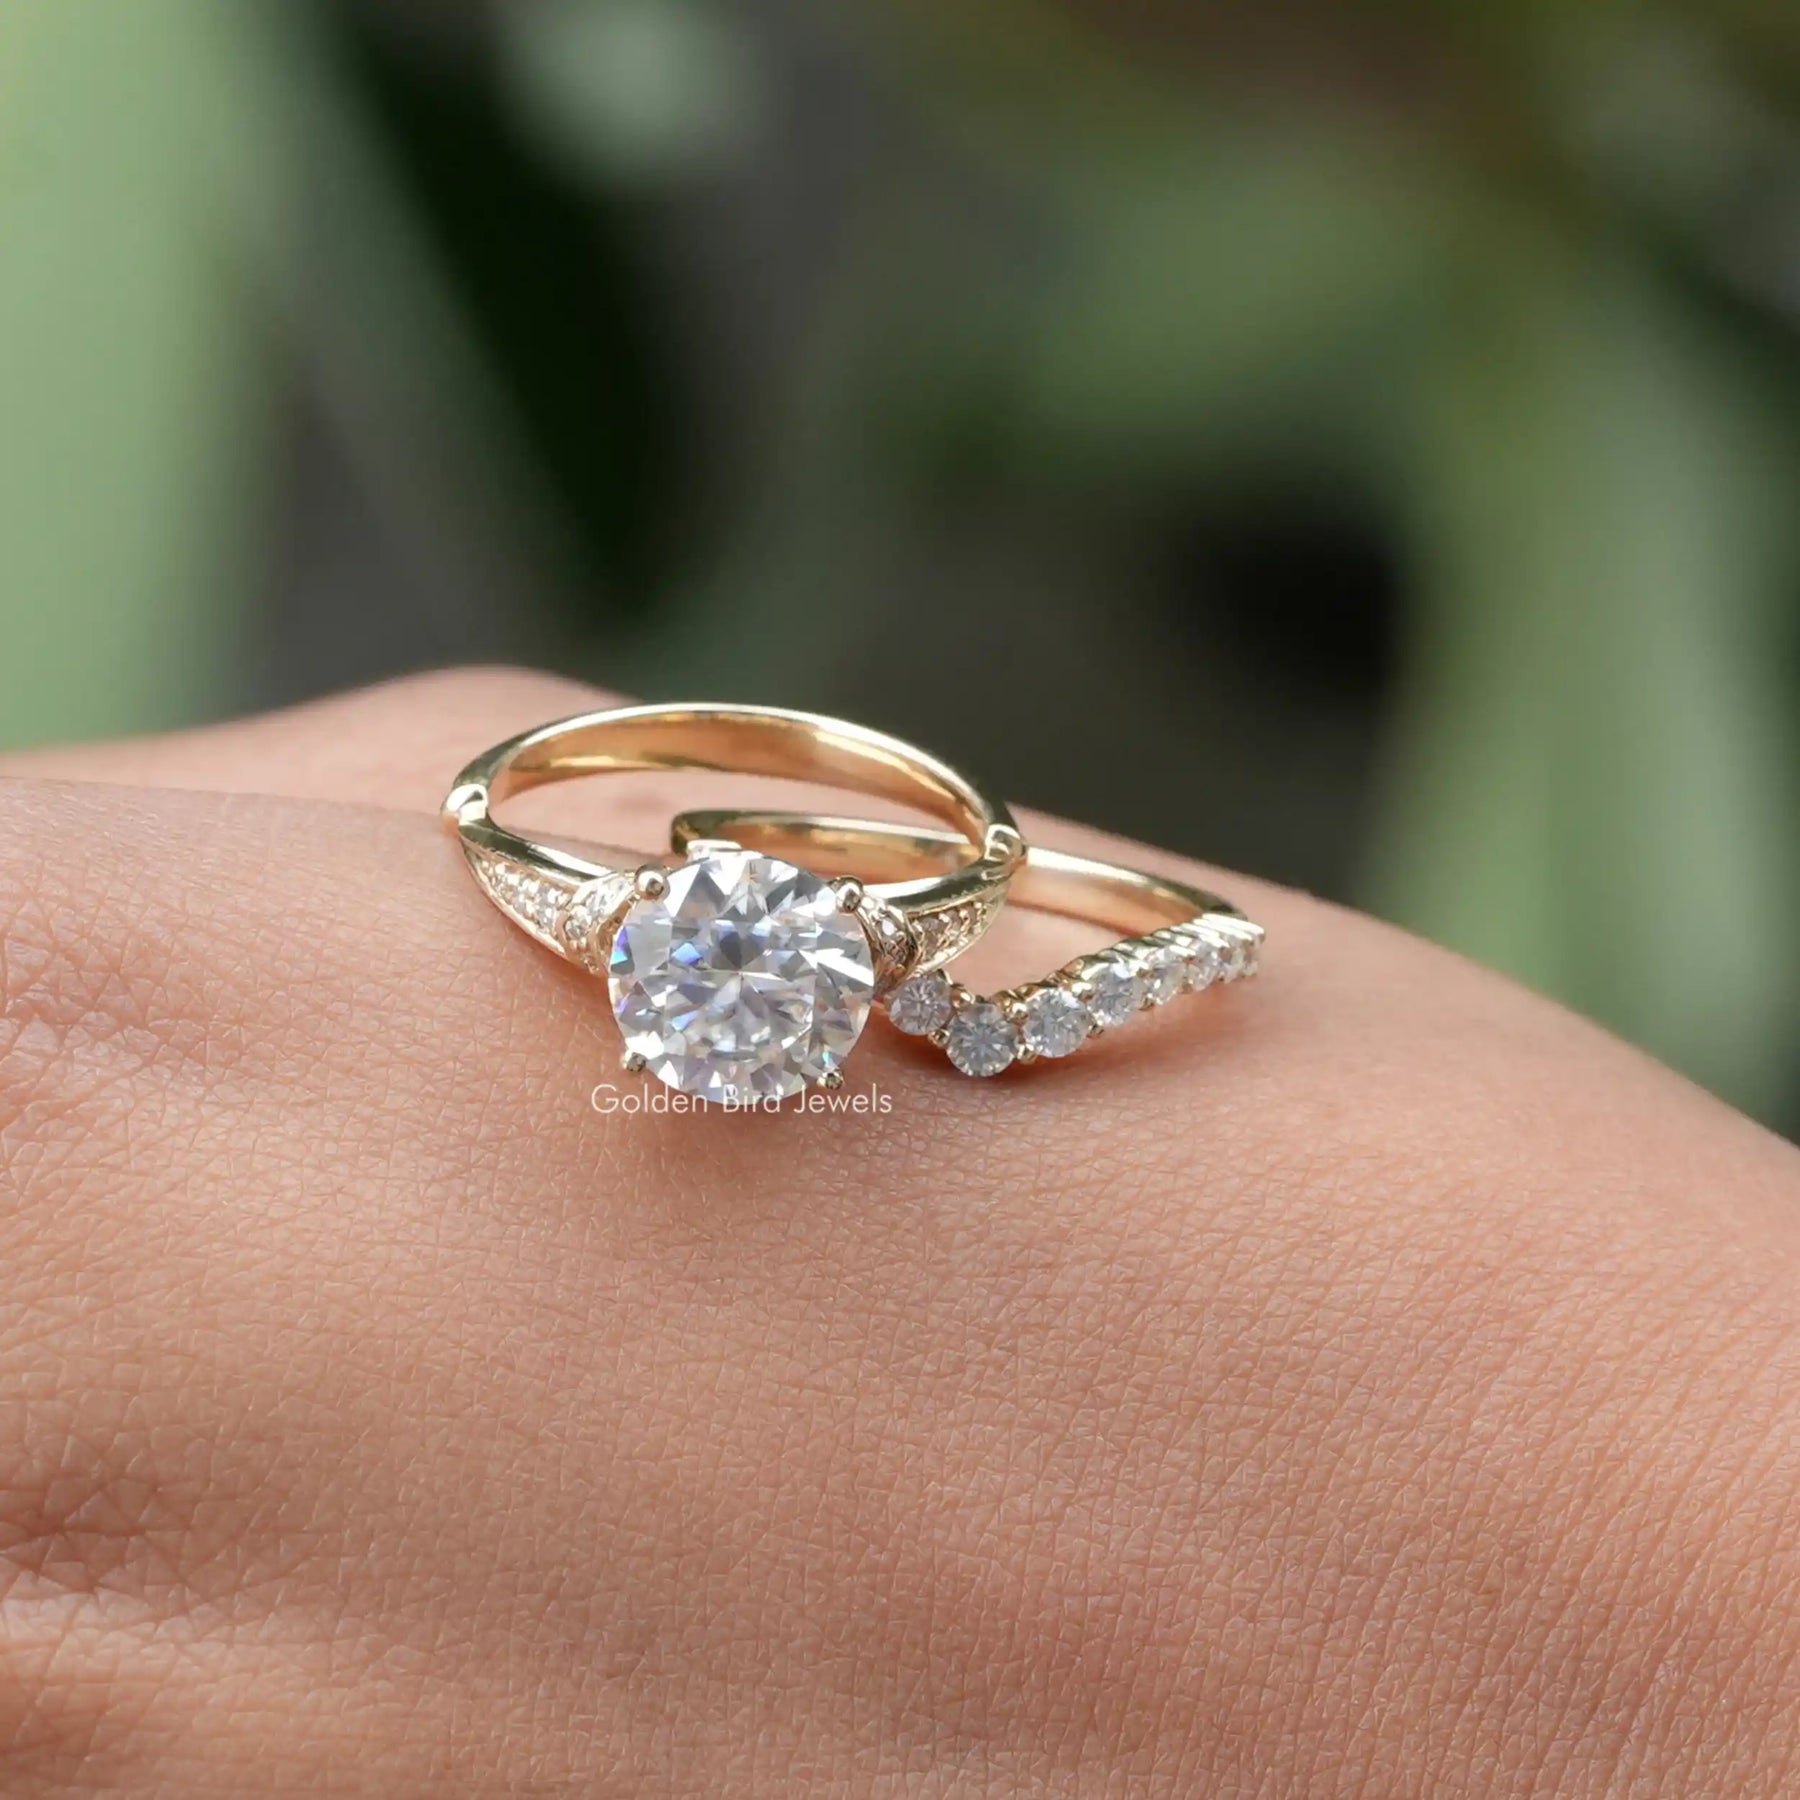 [Front view of round cut moissanite accent stone ring made of 14k yellow gold]-[Golden Bird Jewels]